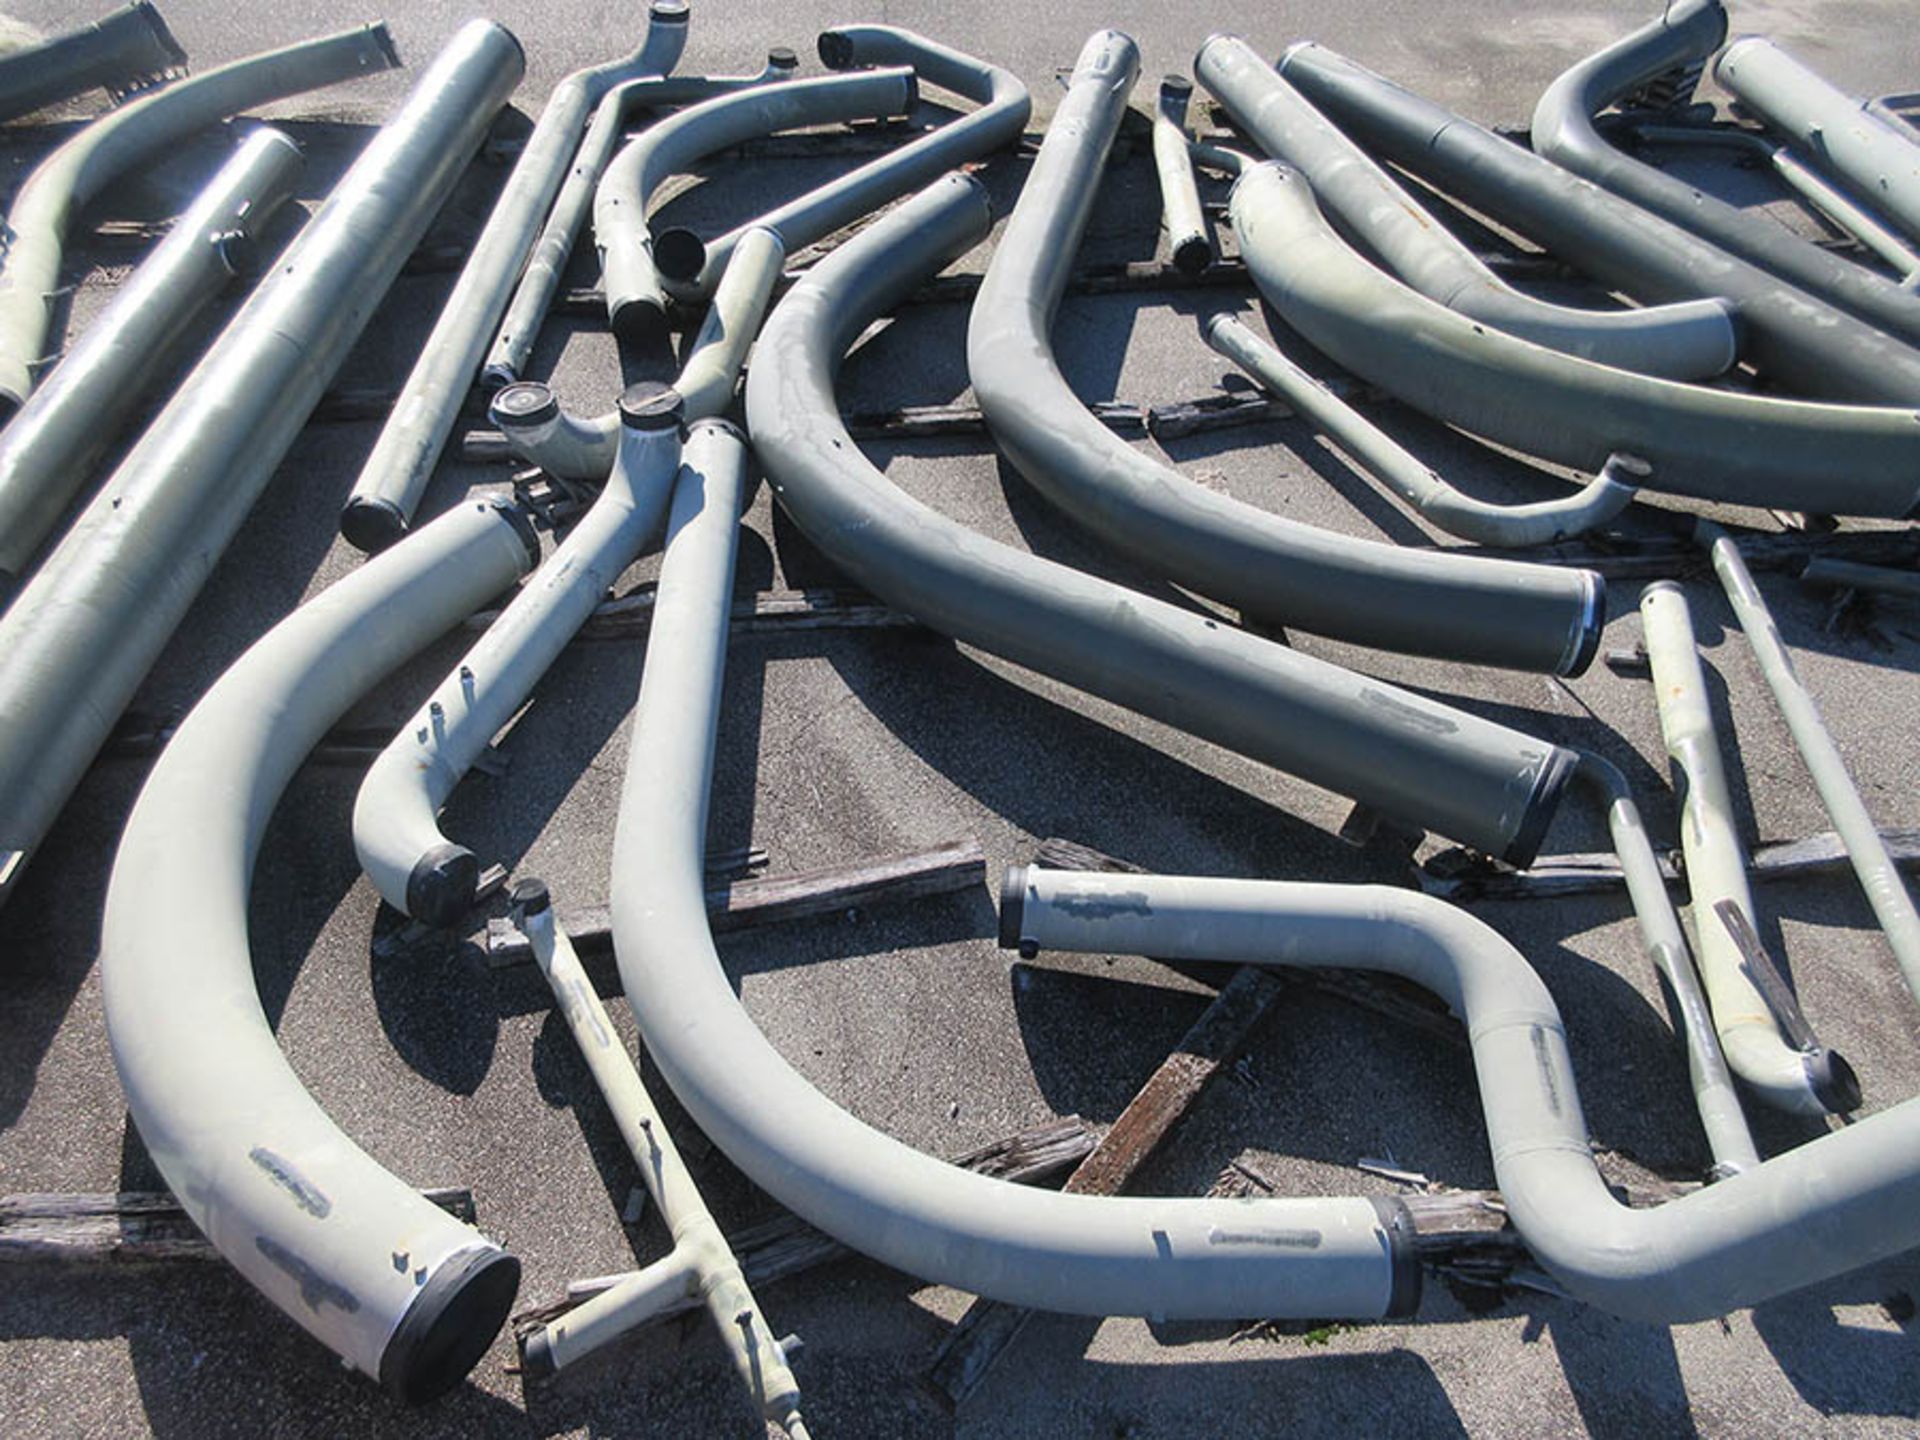 LARGE LOT OF ASSORTED PIPE: 6'' TO 30'' DIA. UP TO 576'', 1,000 LB. - 37,193 LB., LOCATION: GRID 4D - Image 2 of 3